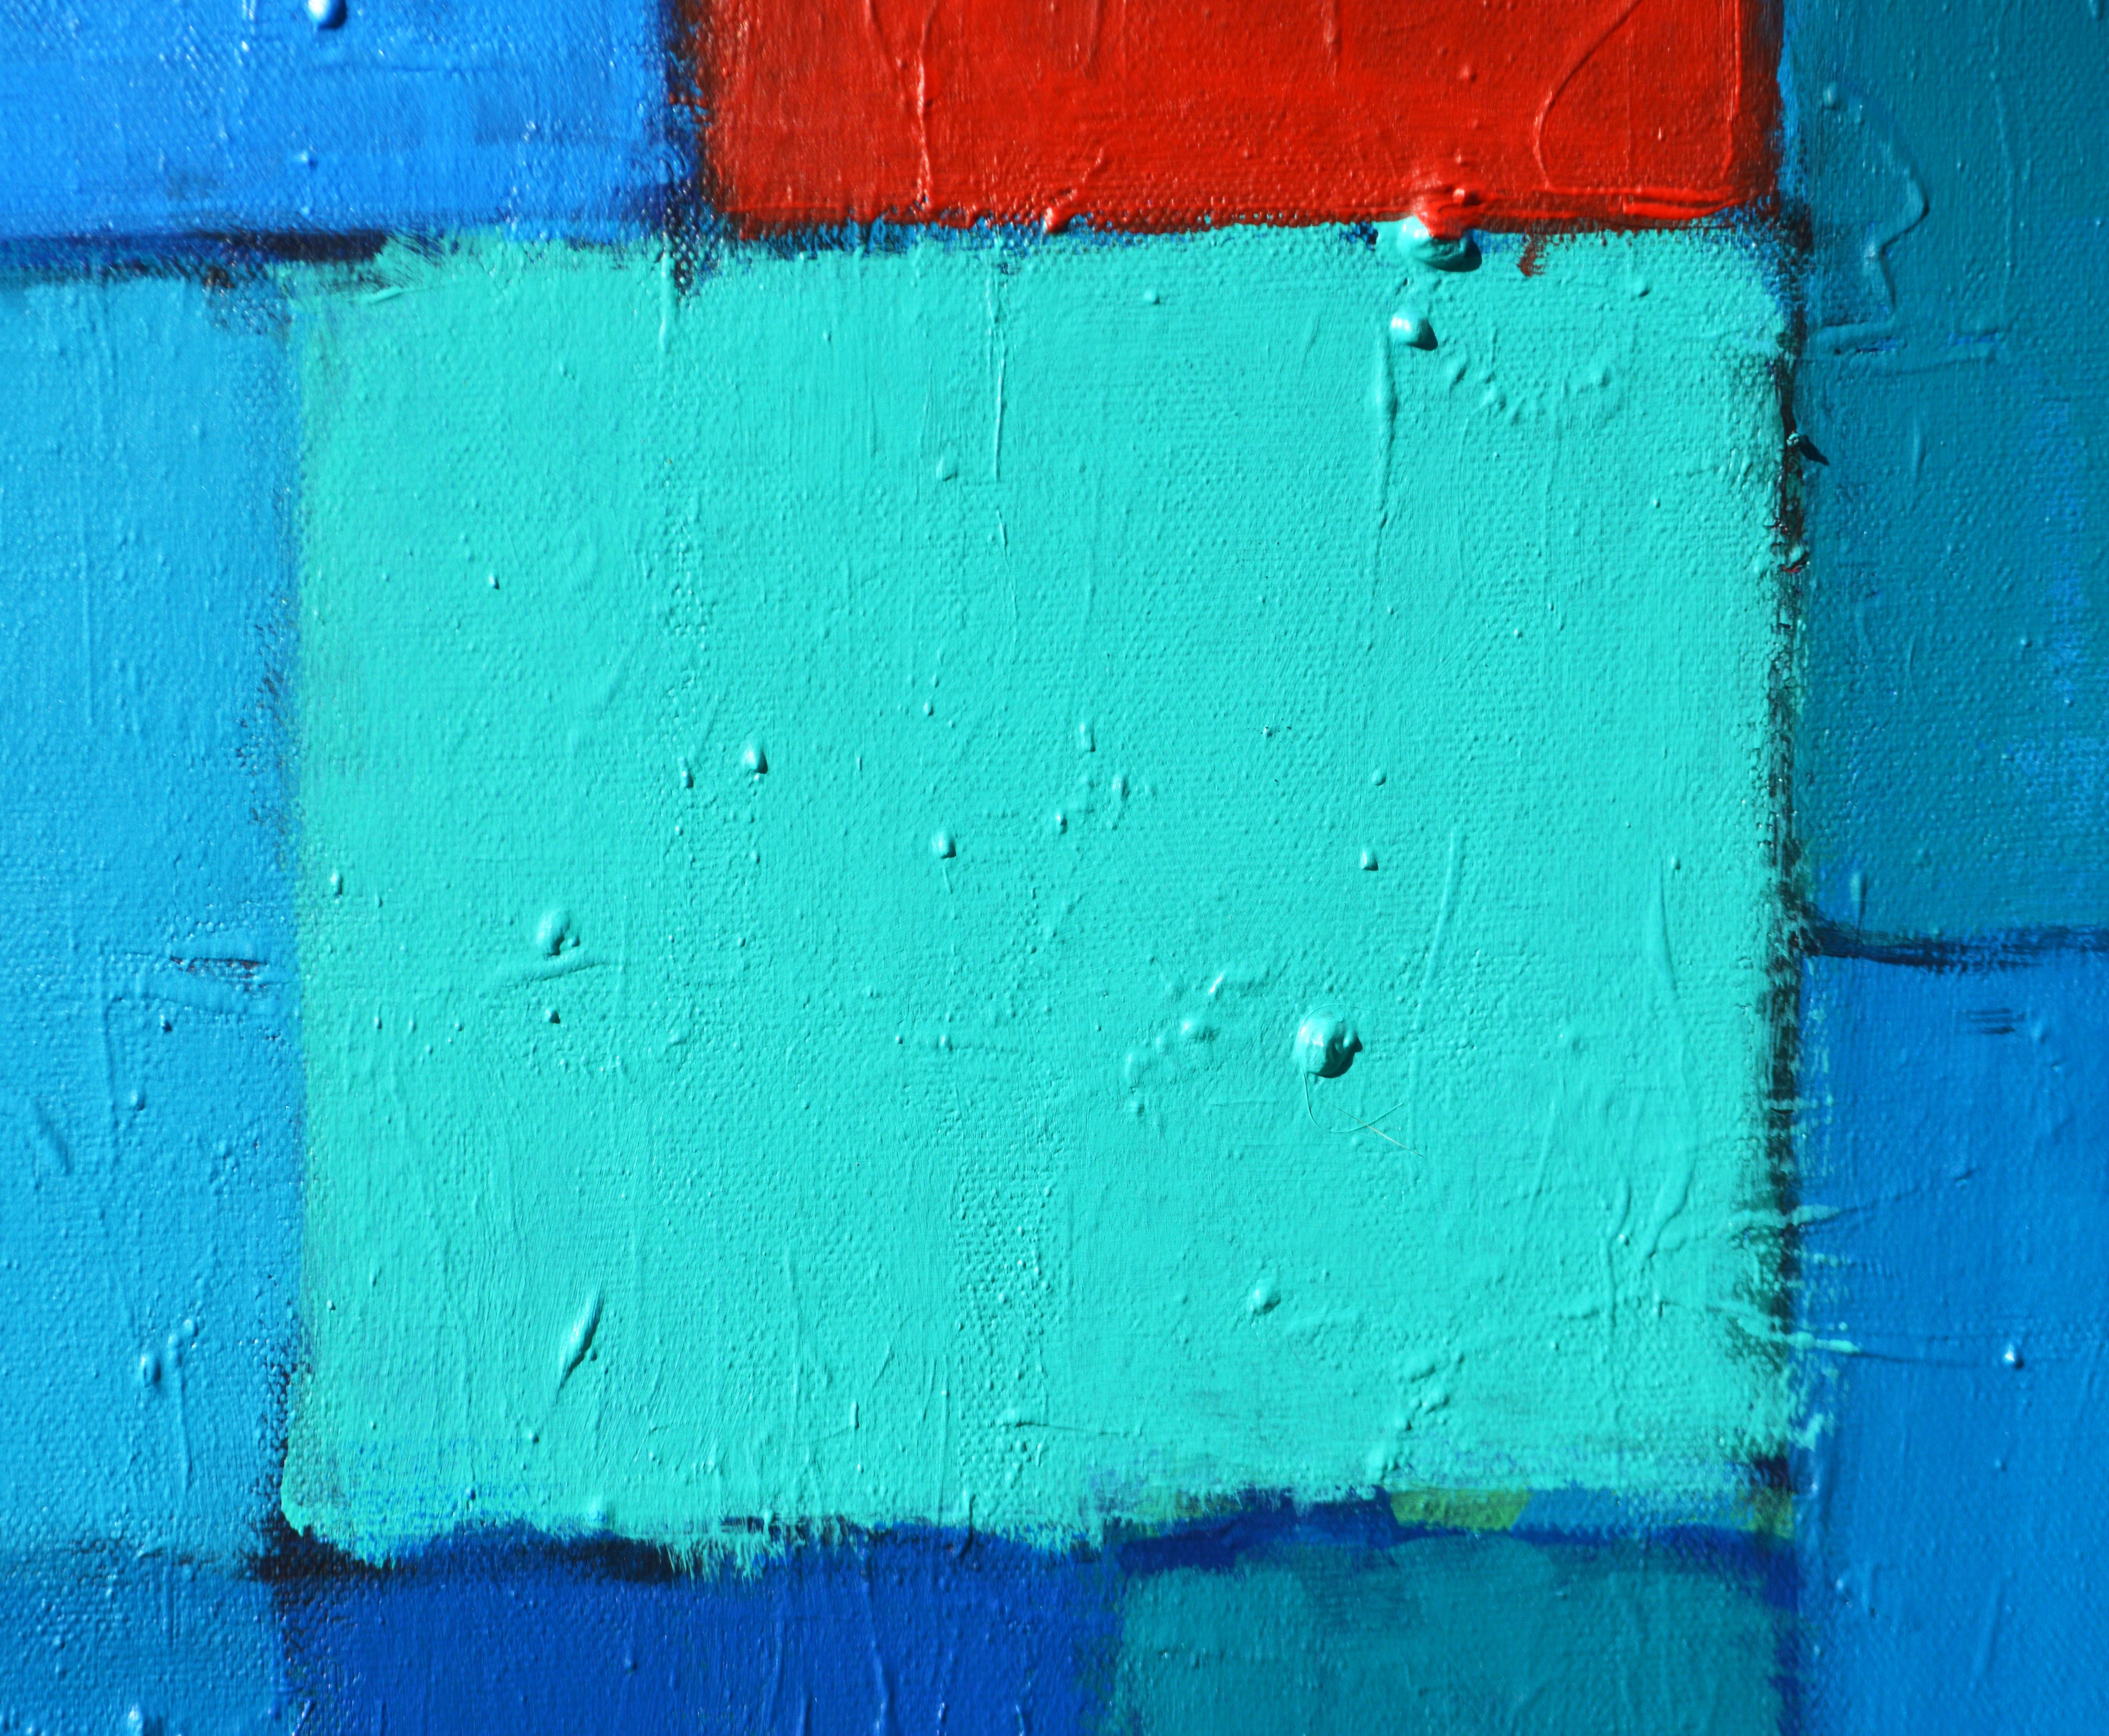 American 'Urban Landscape' Original Abstract Painting by Lars Hegelund, 30 x 36 in. For Sale